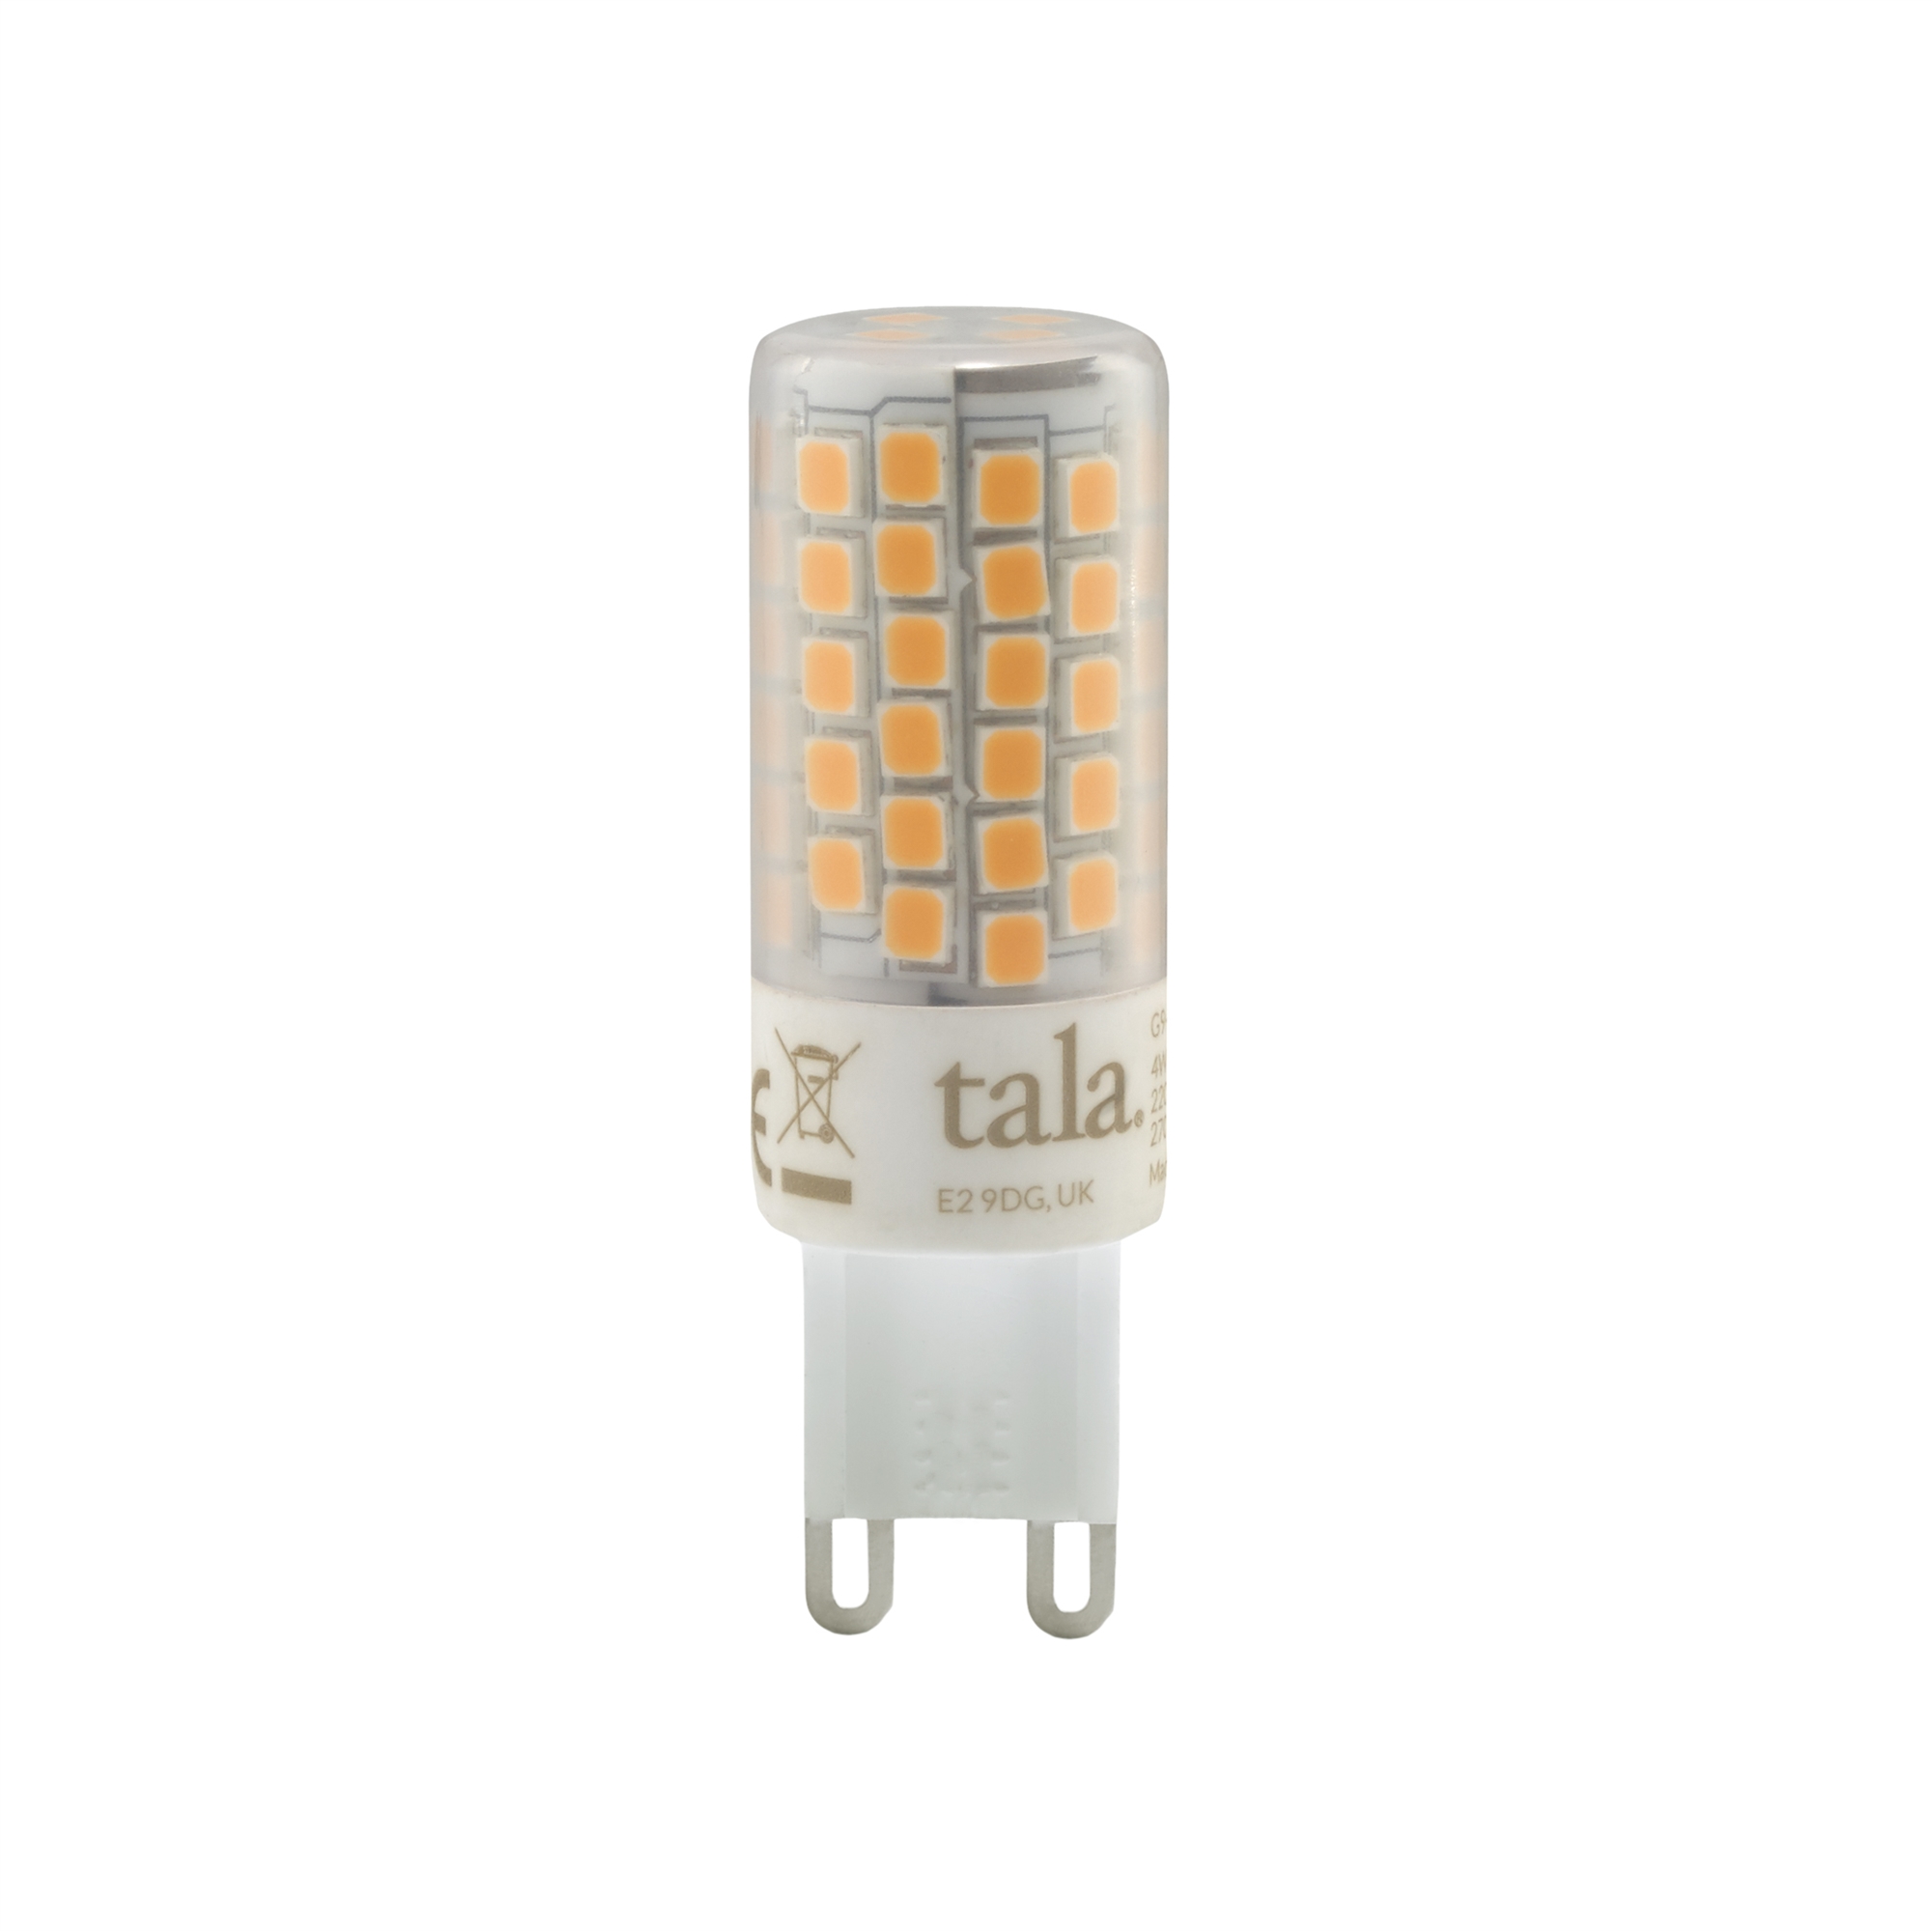 Tala G9 3.6W LED Lamp 2700K CRI 97 230V Dimmable Cover CE